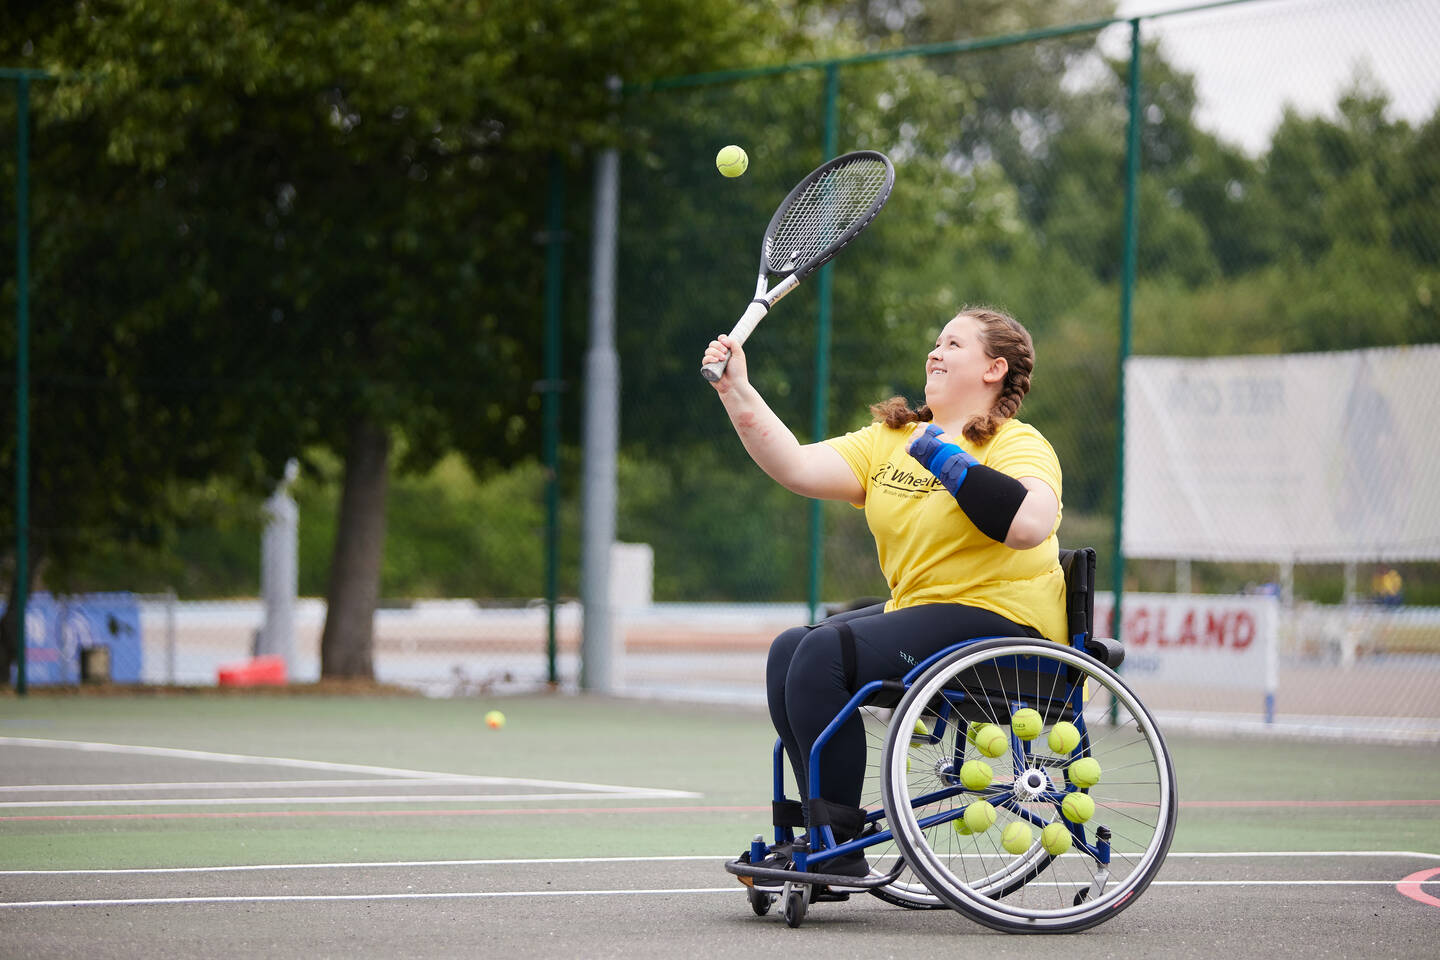 A girl serves whilst playing wheelchair tennis.